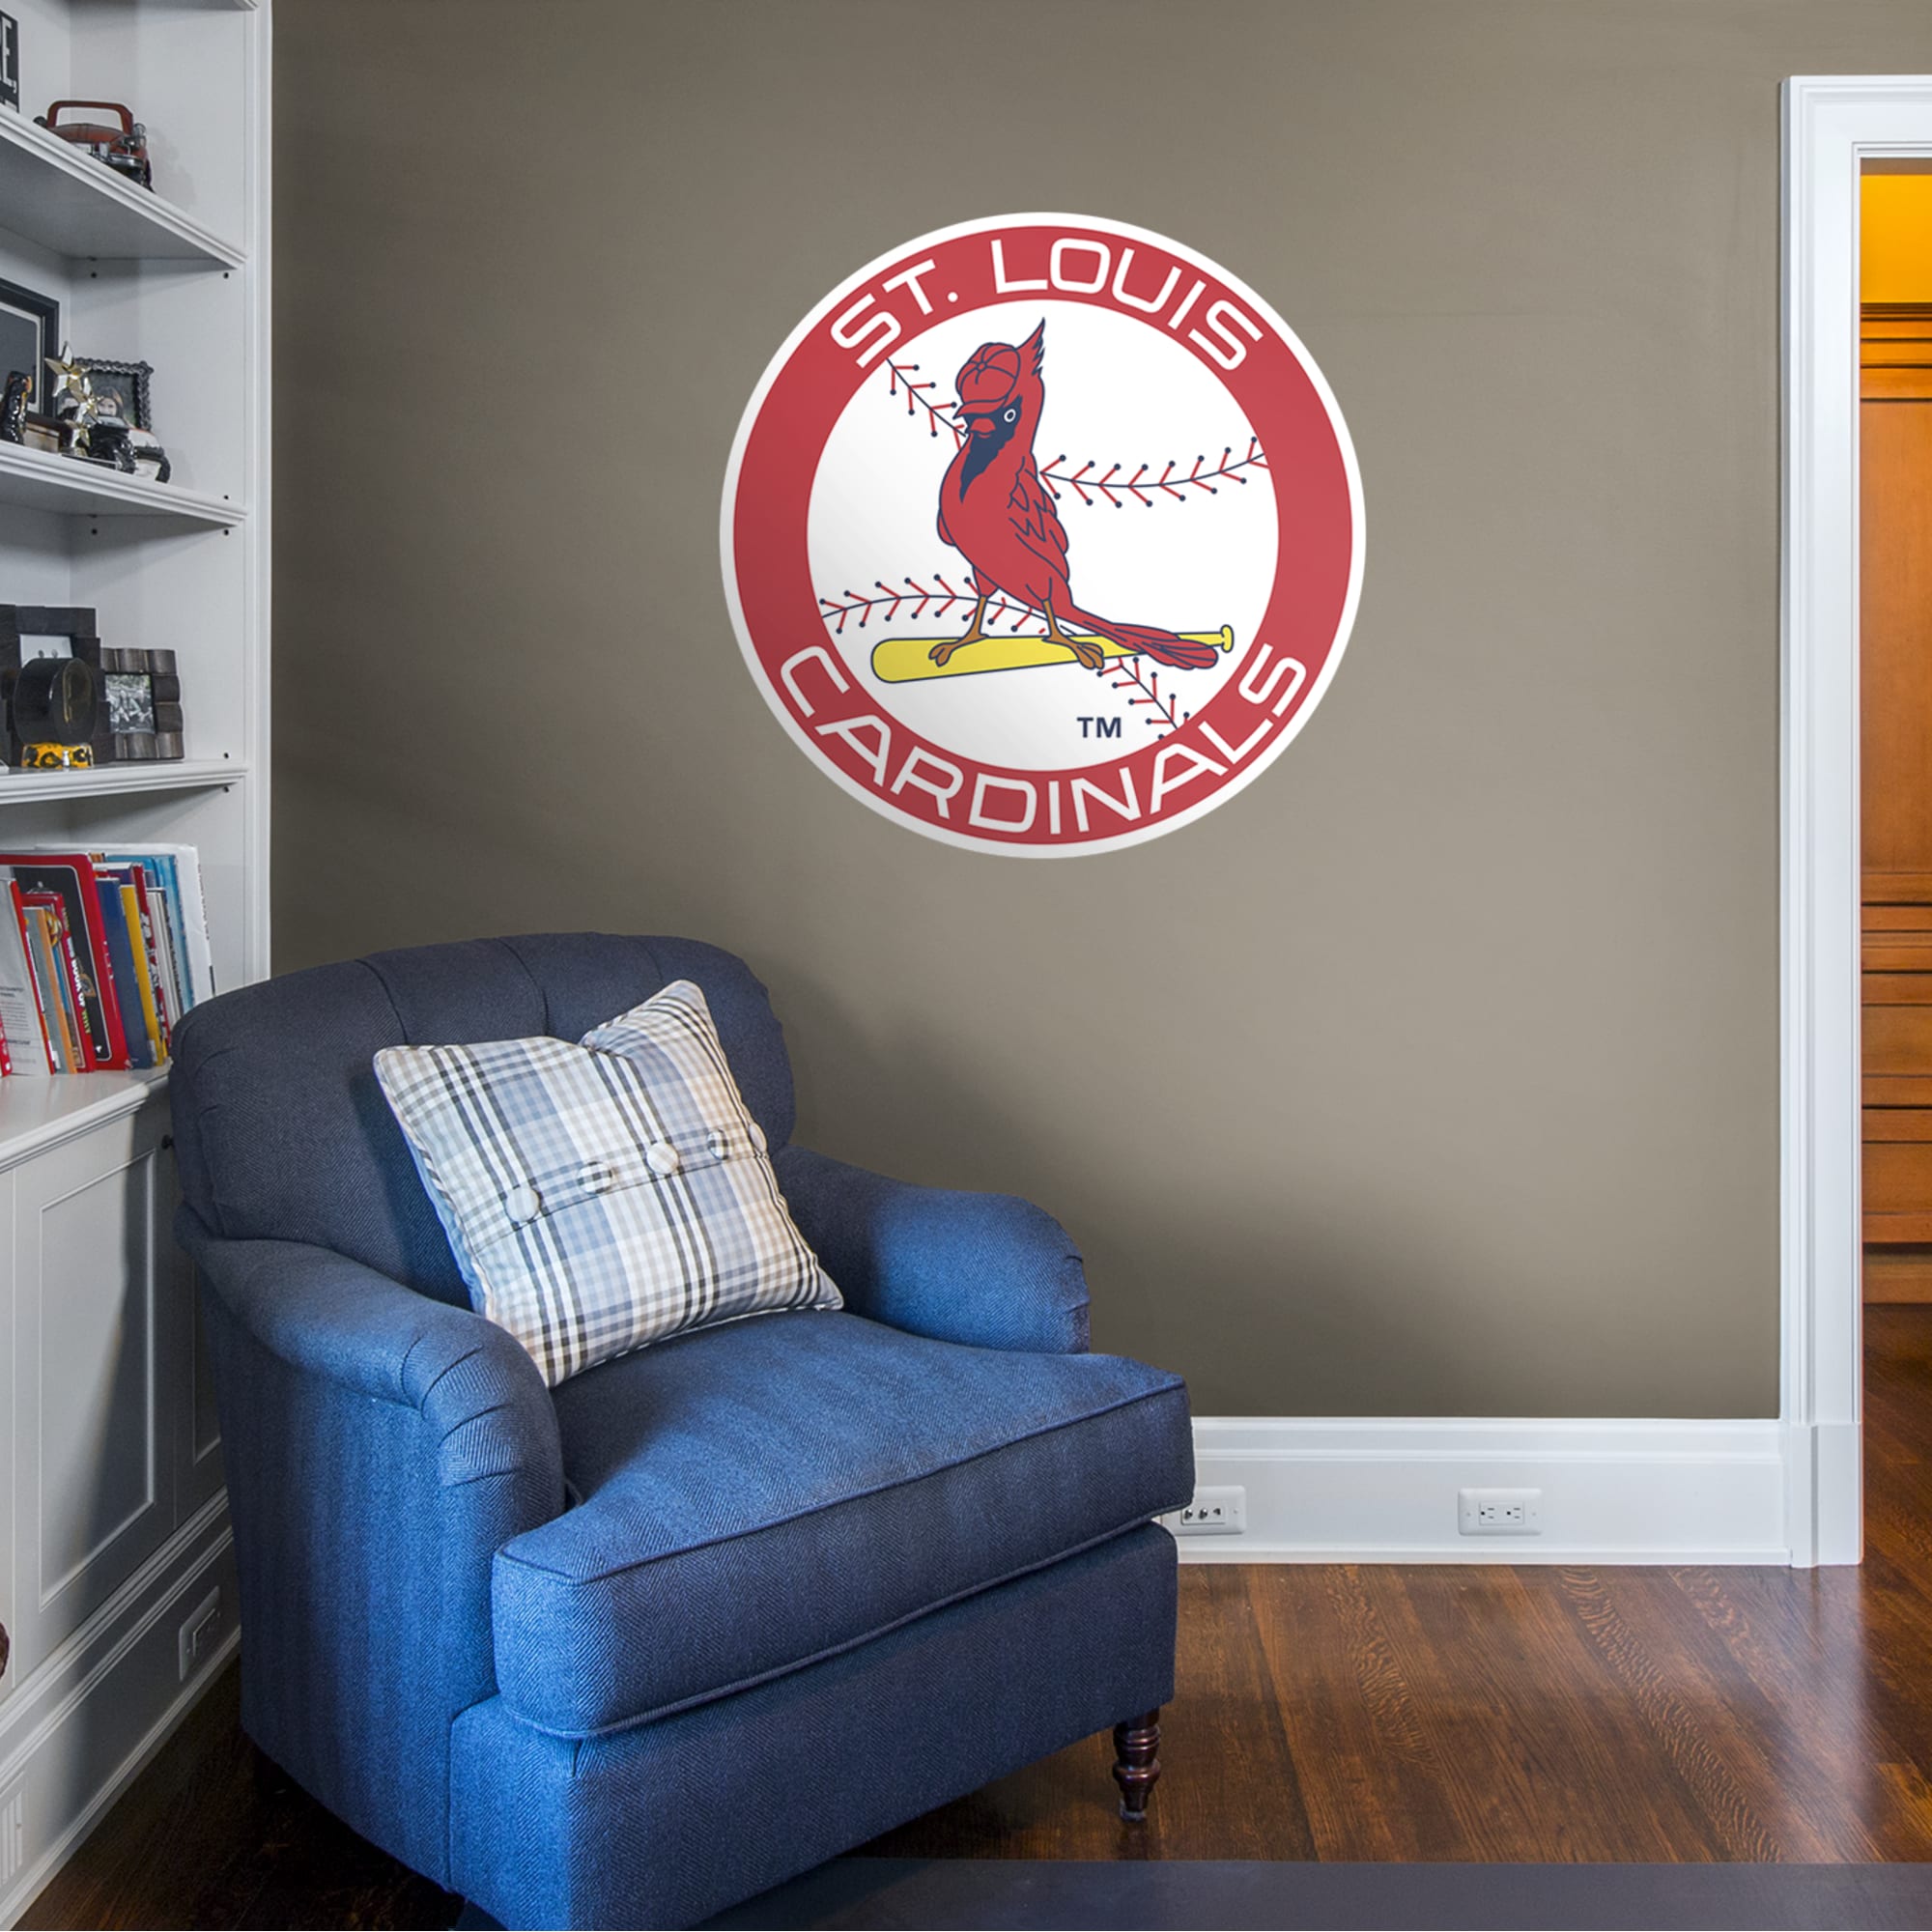 St. Louis Cardinals: Classic Logo - Officially Licensed MLB Removable Wall Decal 38.0"W x 38.0"H by Fathead | Vinyl